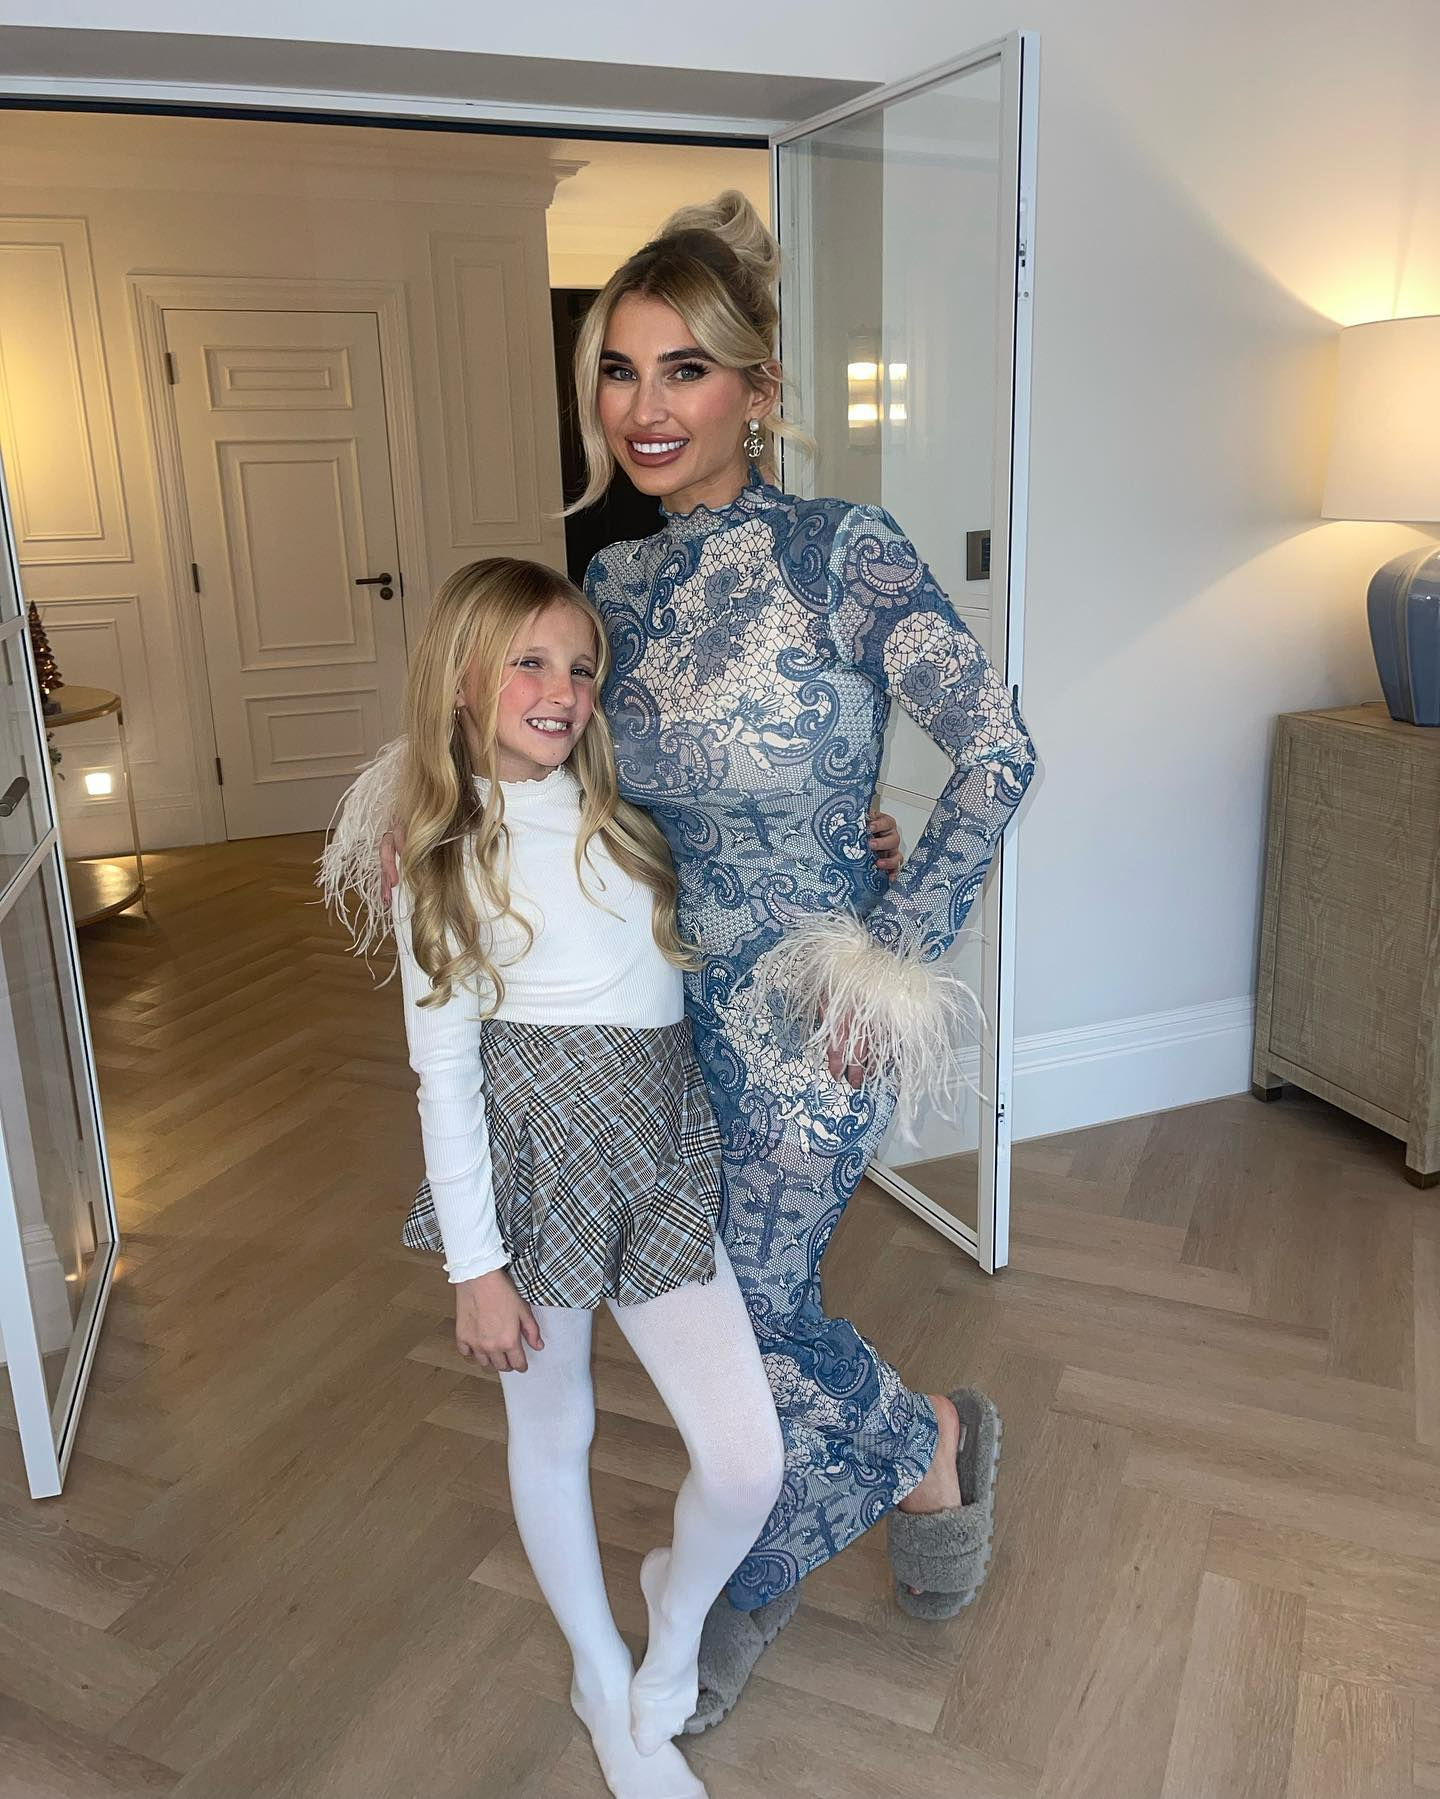 Billie Faiers accused of flaunting her wealth as daughter shows off £195 coat – with fans moaning ‘out of my budget’